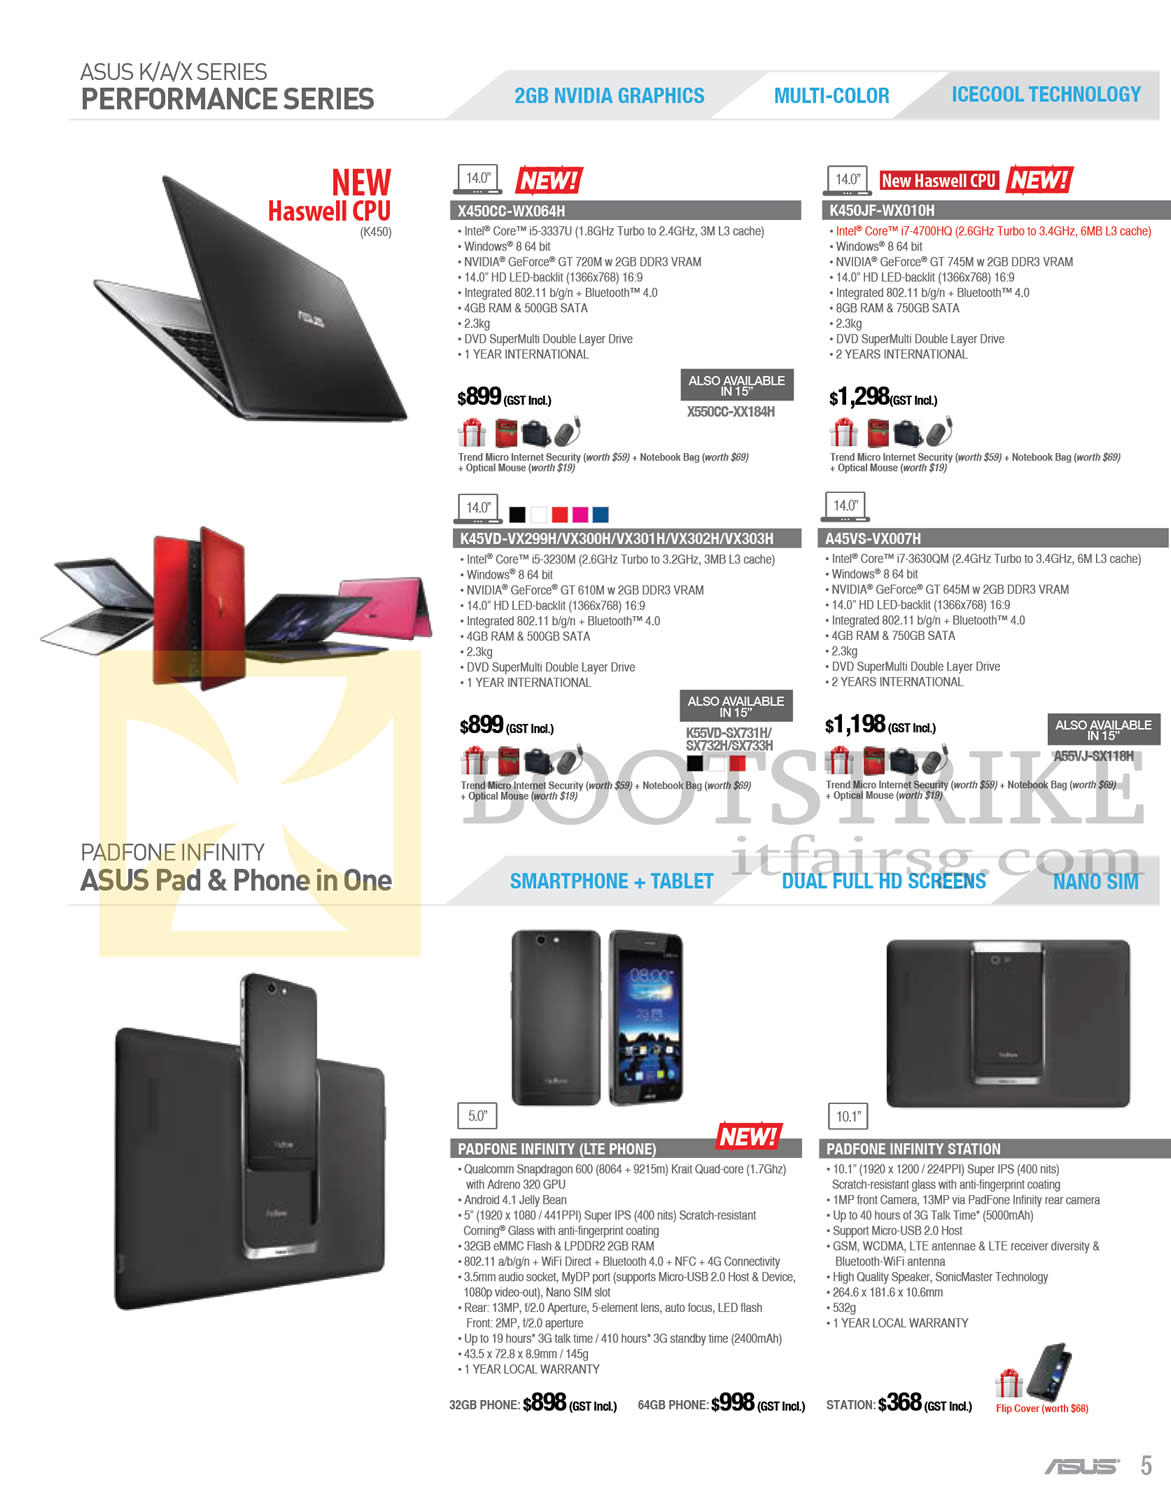 PC SHOW 2013 price list image brochure of ASUS Notebooks X450CC-WX064H, K450JF-WX010H, K45VD-VX299H, VX300H, VX301H, VX302H, VX303H, A45VS-VX007H, Padfone Infinity, Station